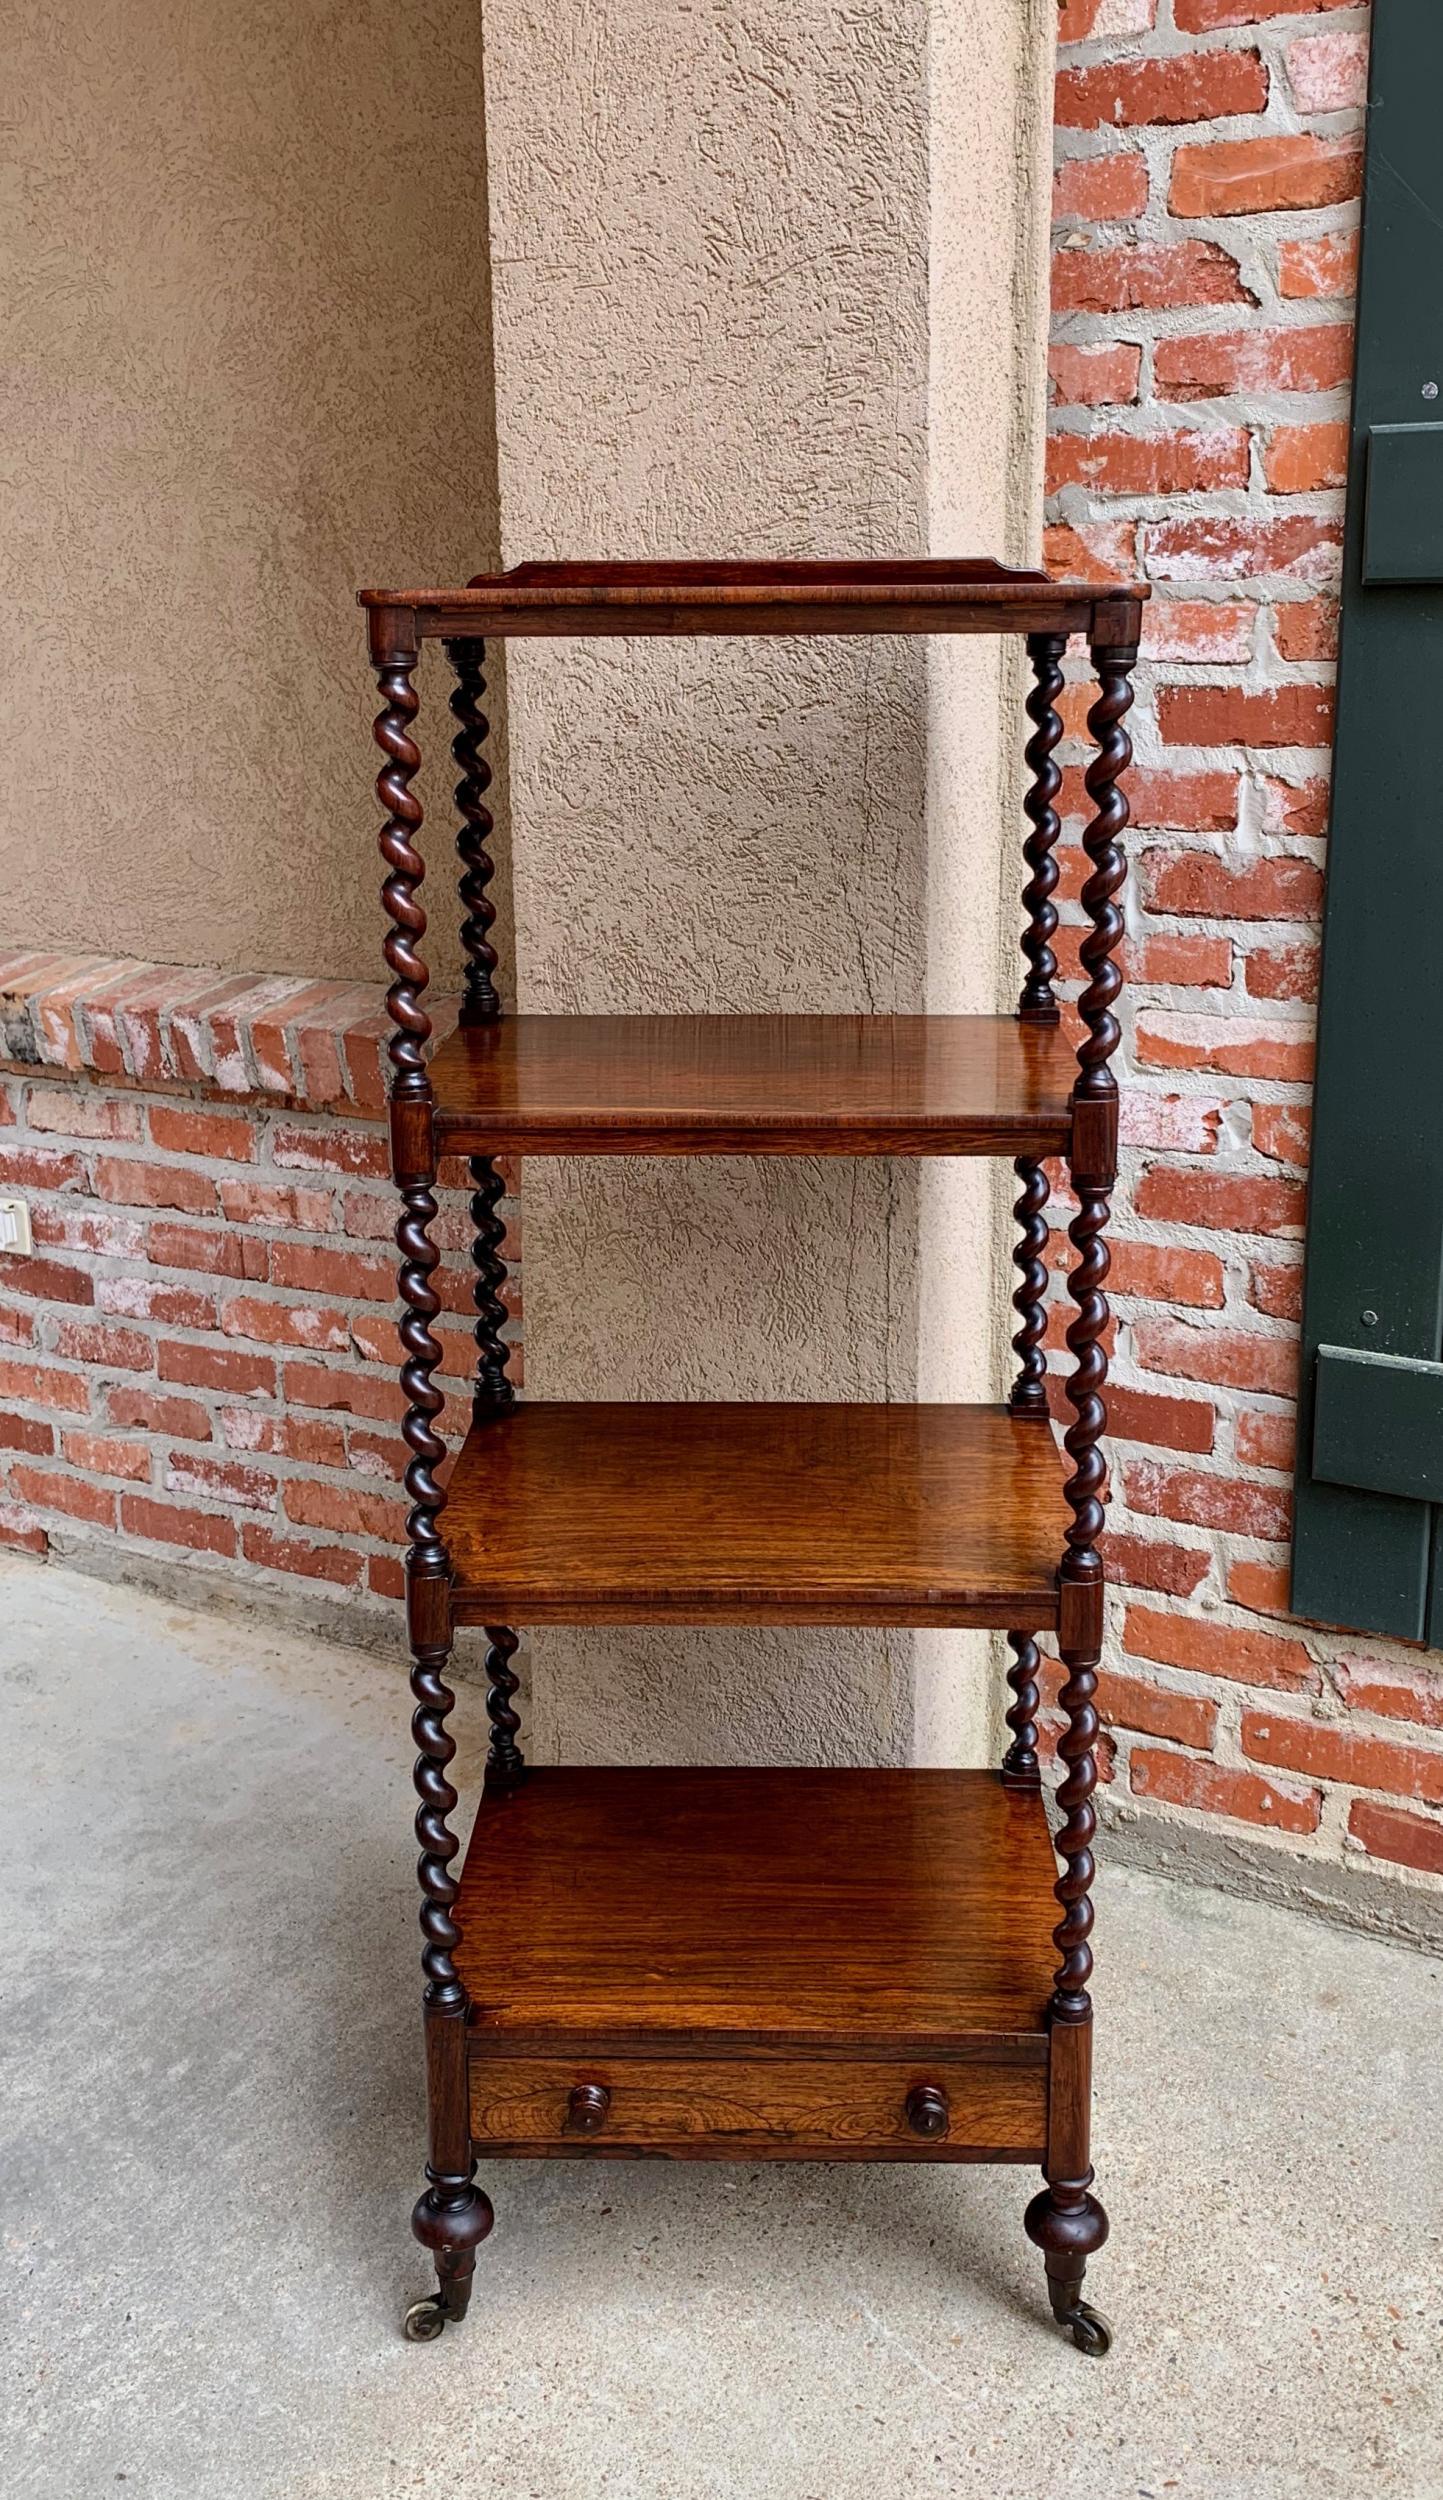 Antique English mahogany display shelf barley twist étagère bookcase, 19th c

~Direct from England~
~Tall antique English étagère, circa 1850~
~Barley twist columns on all four sides, with beautiful English burl mahogany veneer~
~Four shelves